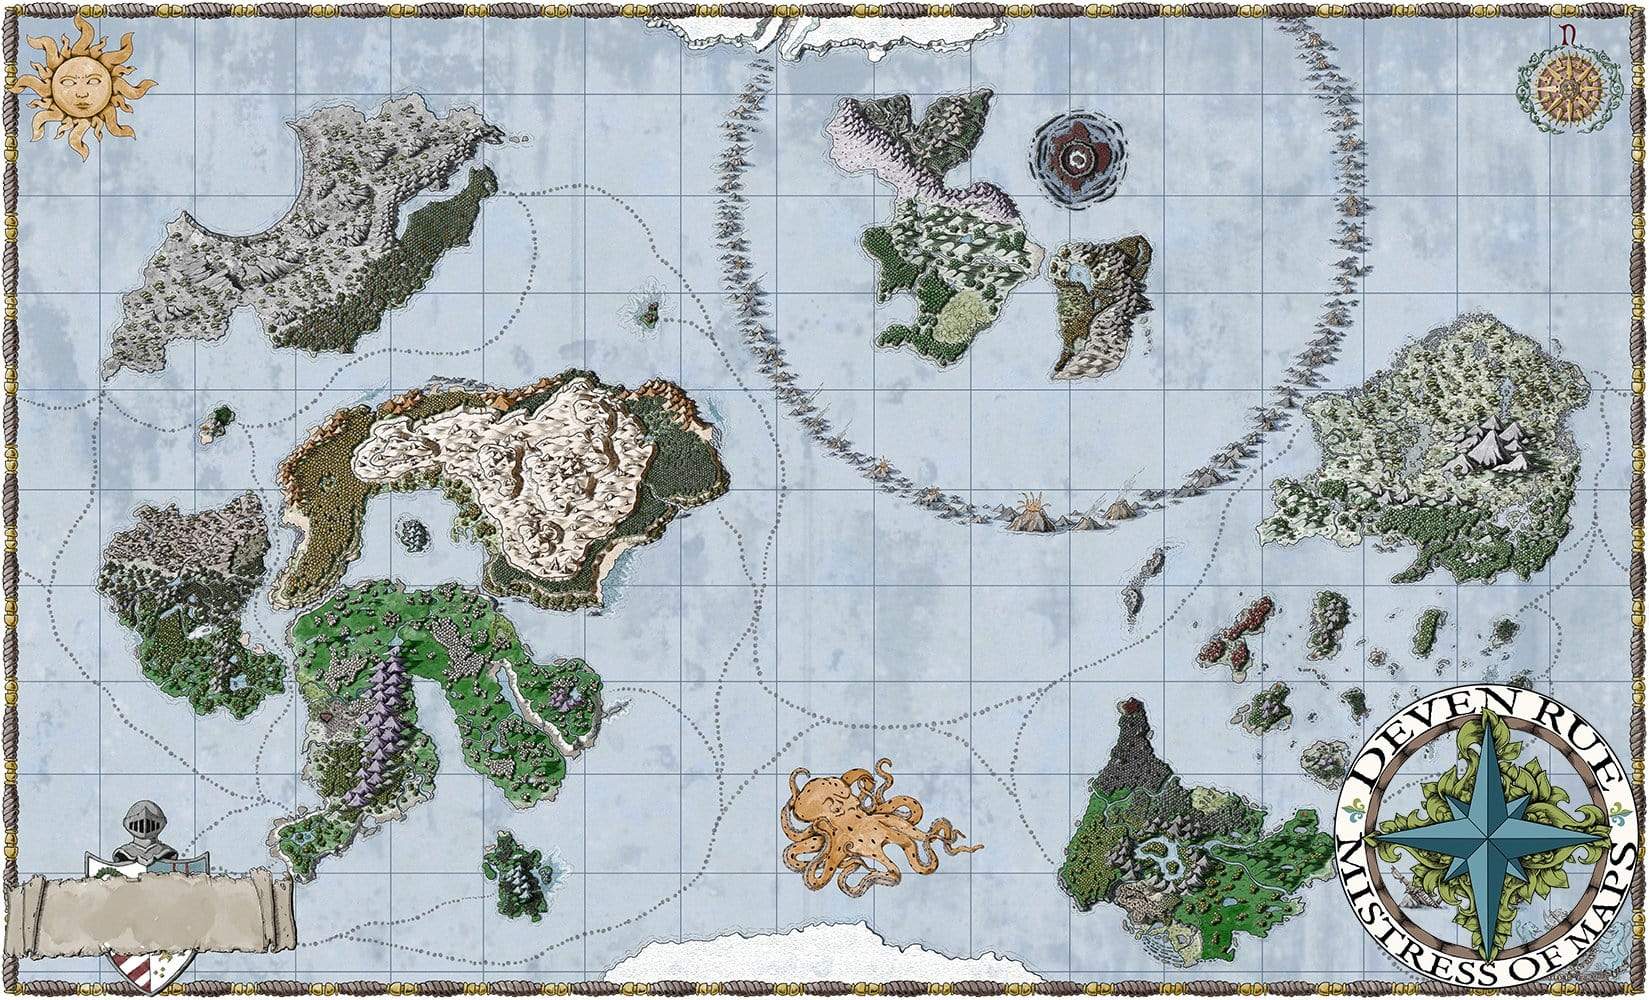 The Ifiron map in color with no labels by Deven Rue.